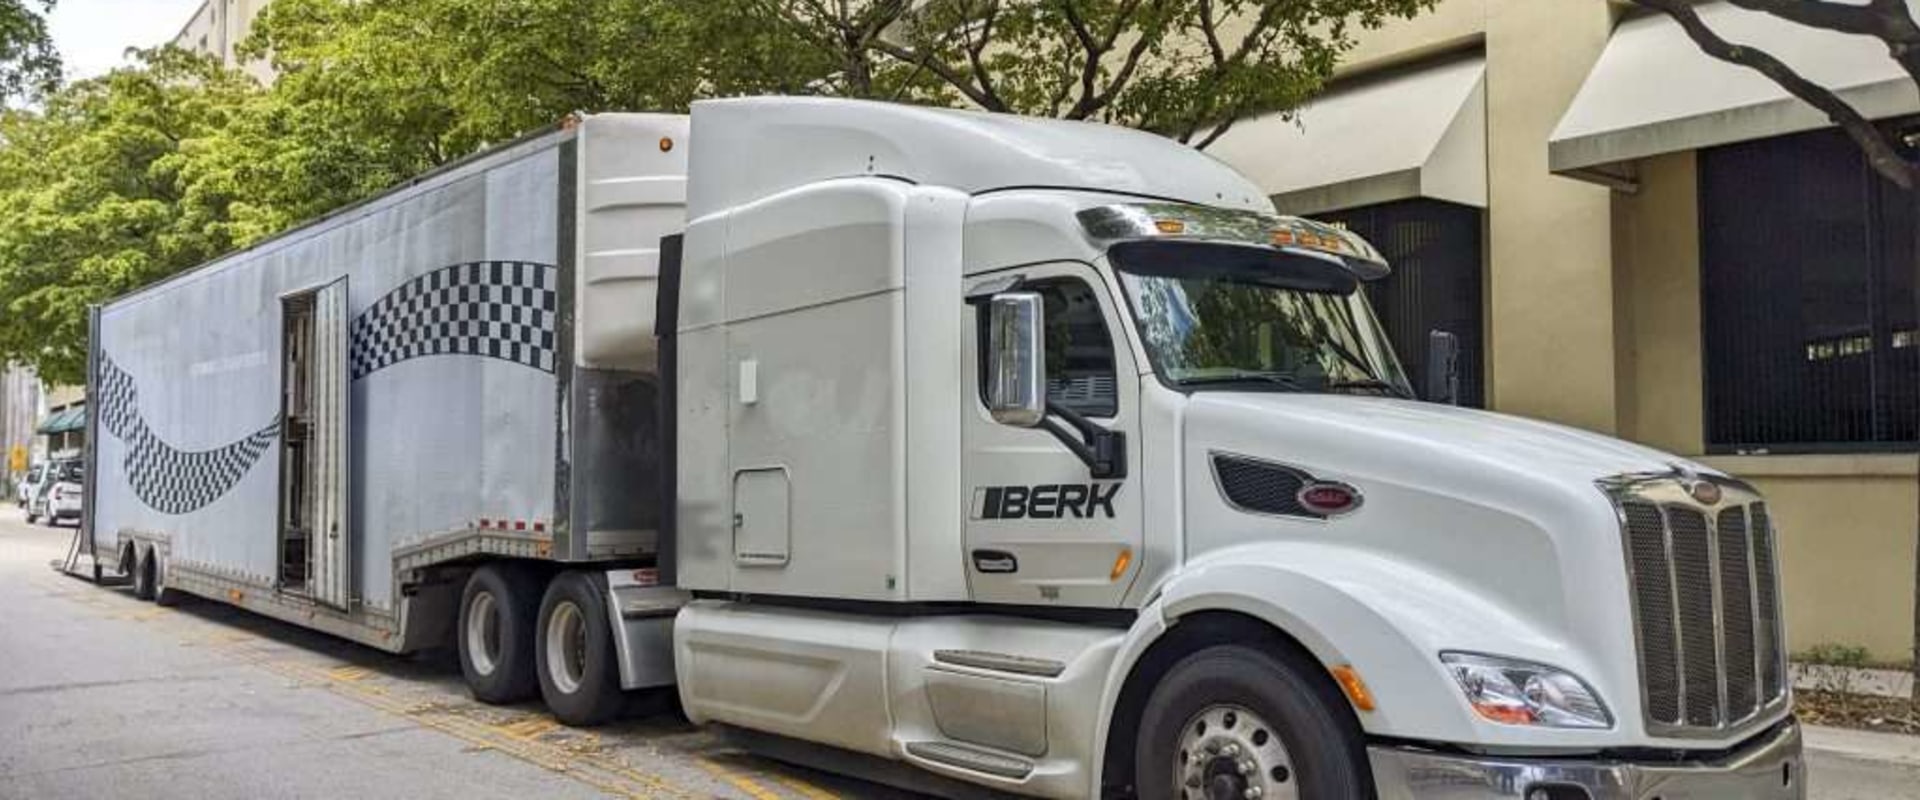 Vehicle Transport Companies in Miami